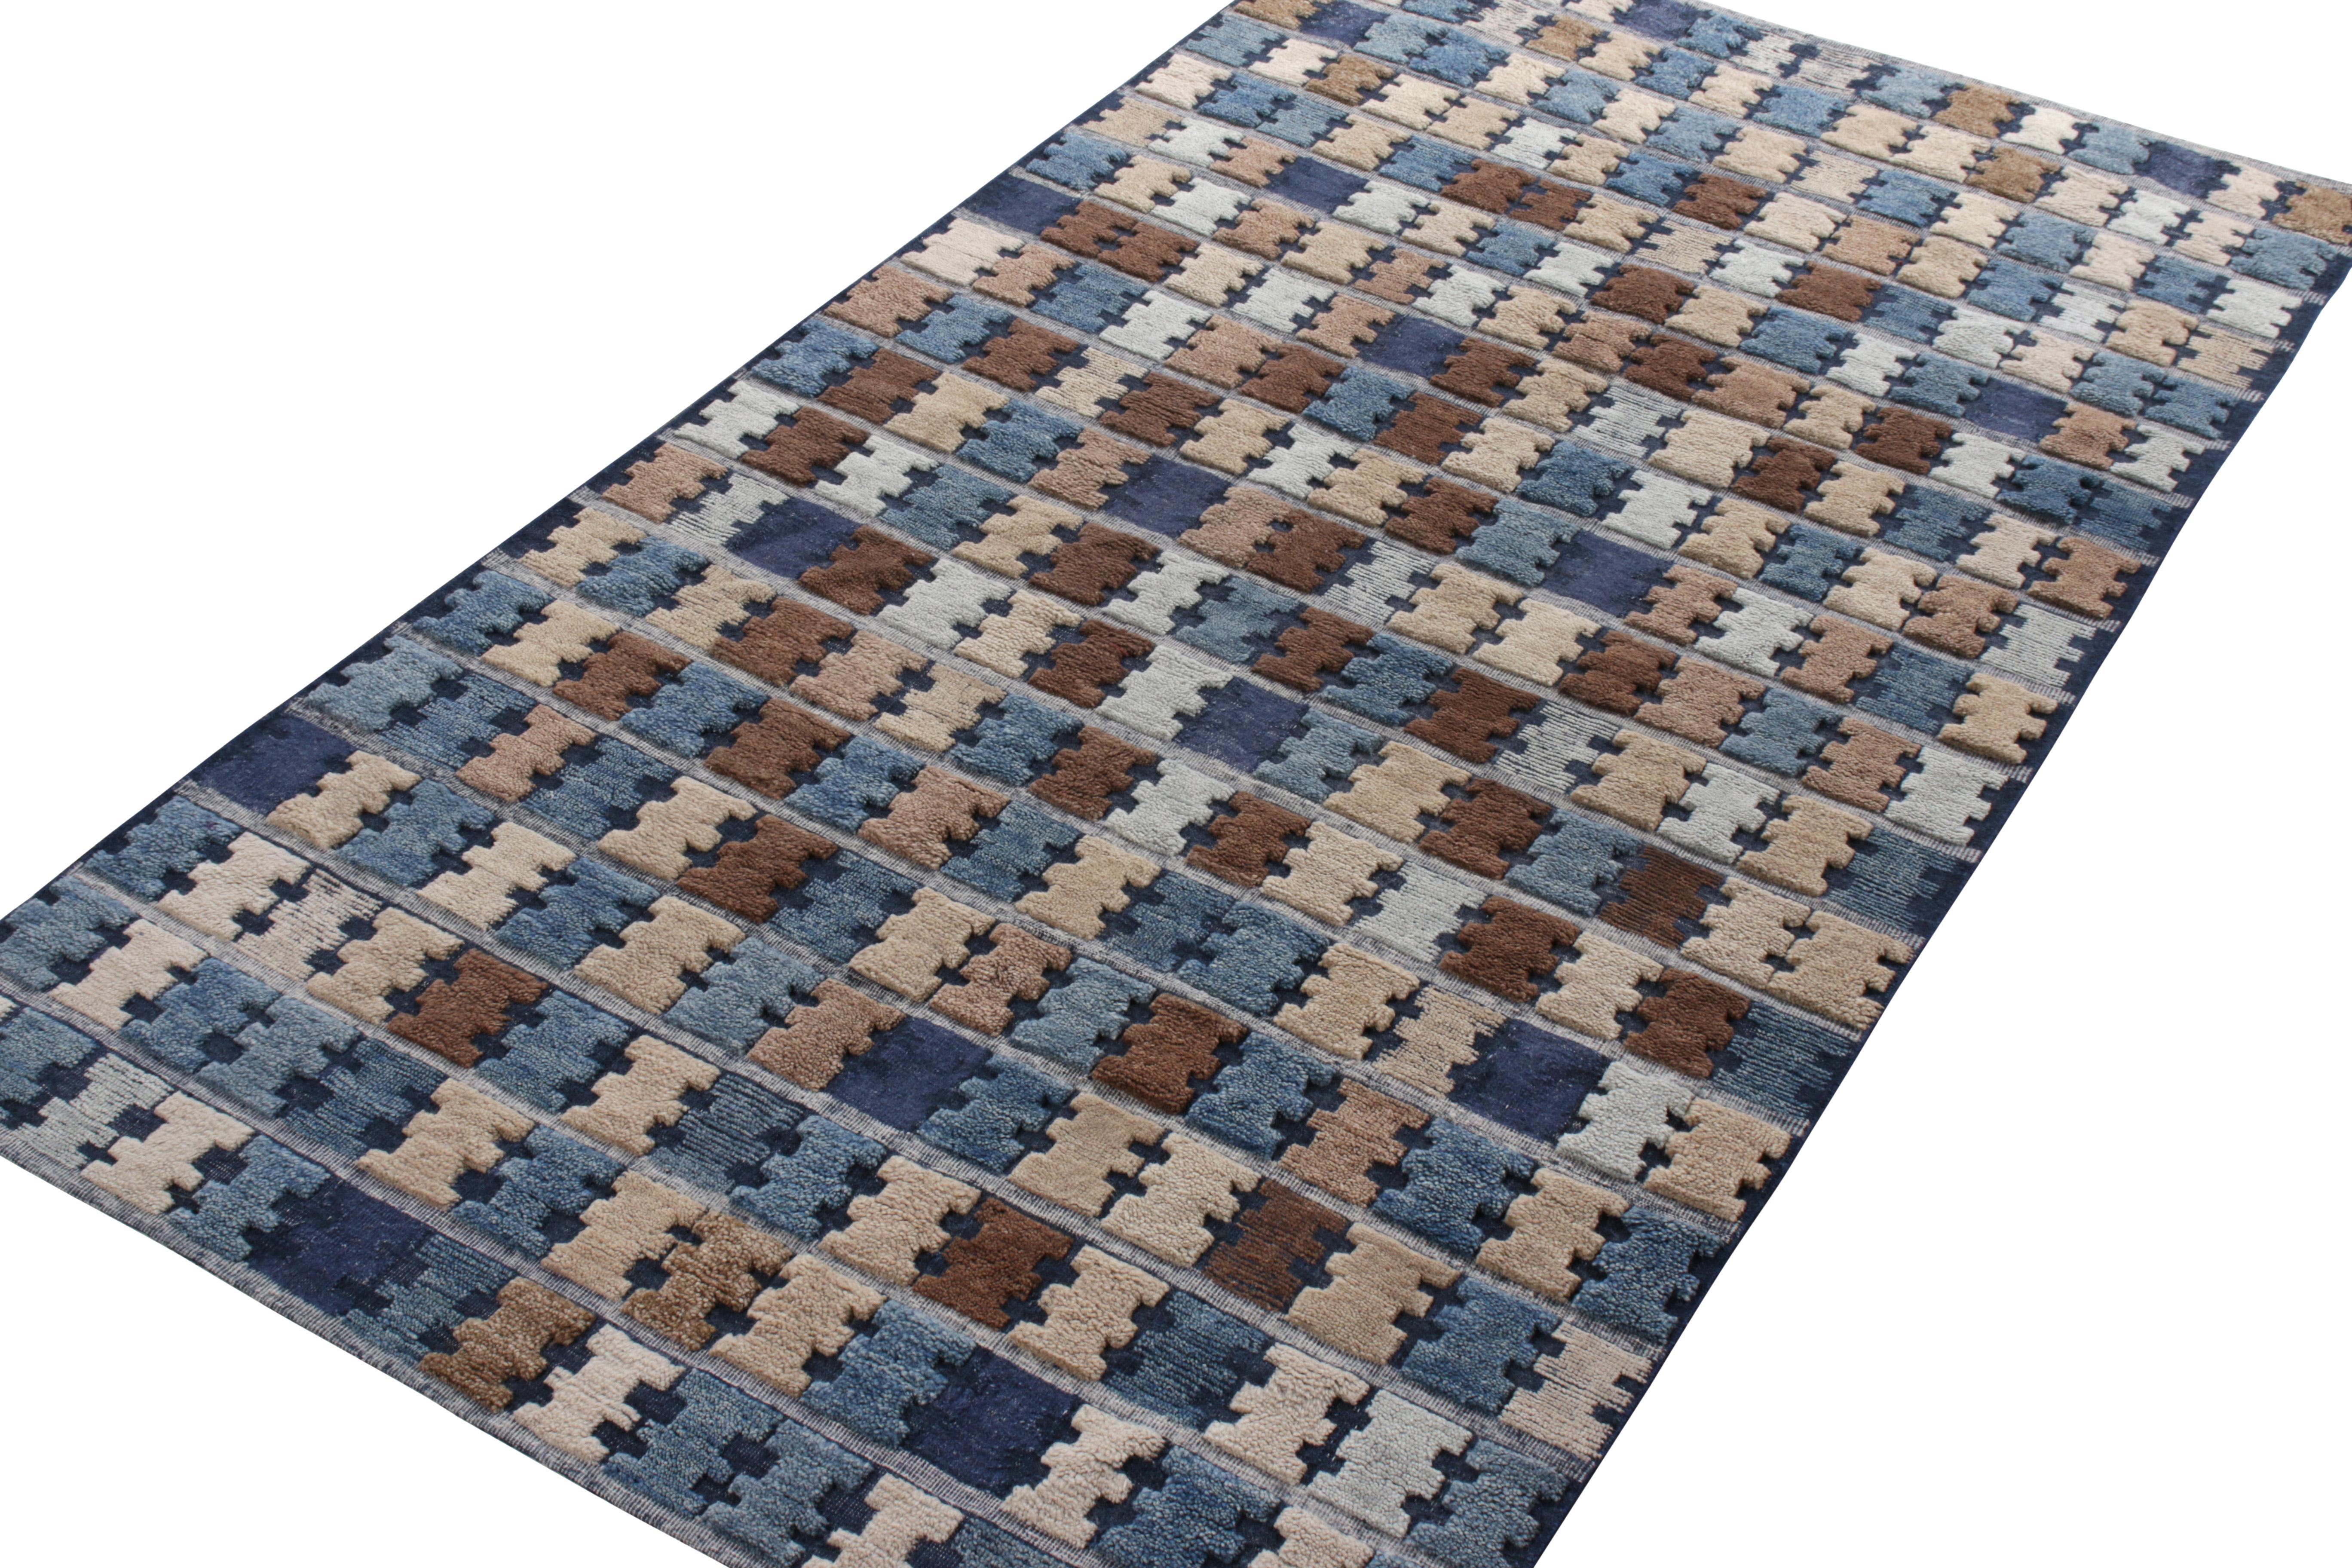 Rug & Kilim presents this fabulous pile addition to the team’s acclaimed Scandinavian rug collection. This 5x10 piece is an example of fine Swedish sensibilities entwined in contemporary aesthetics and textural possibilities. Marked by a neat